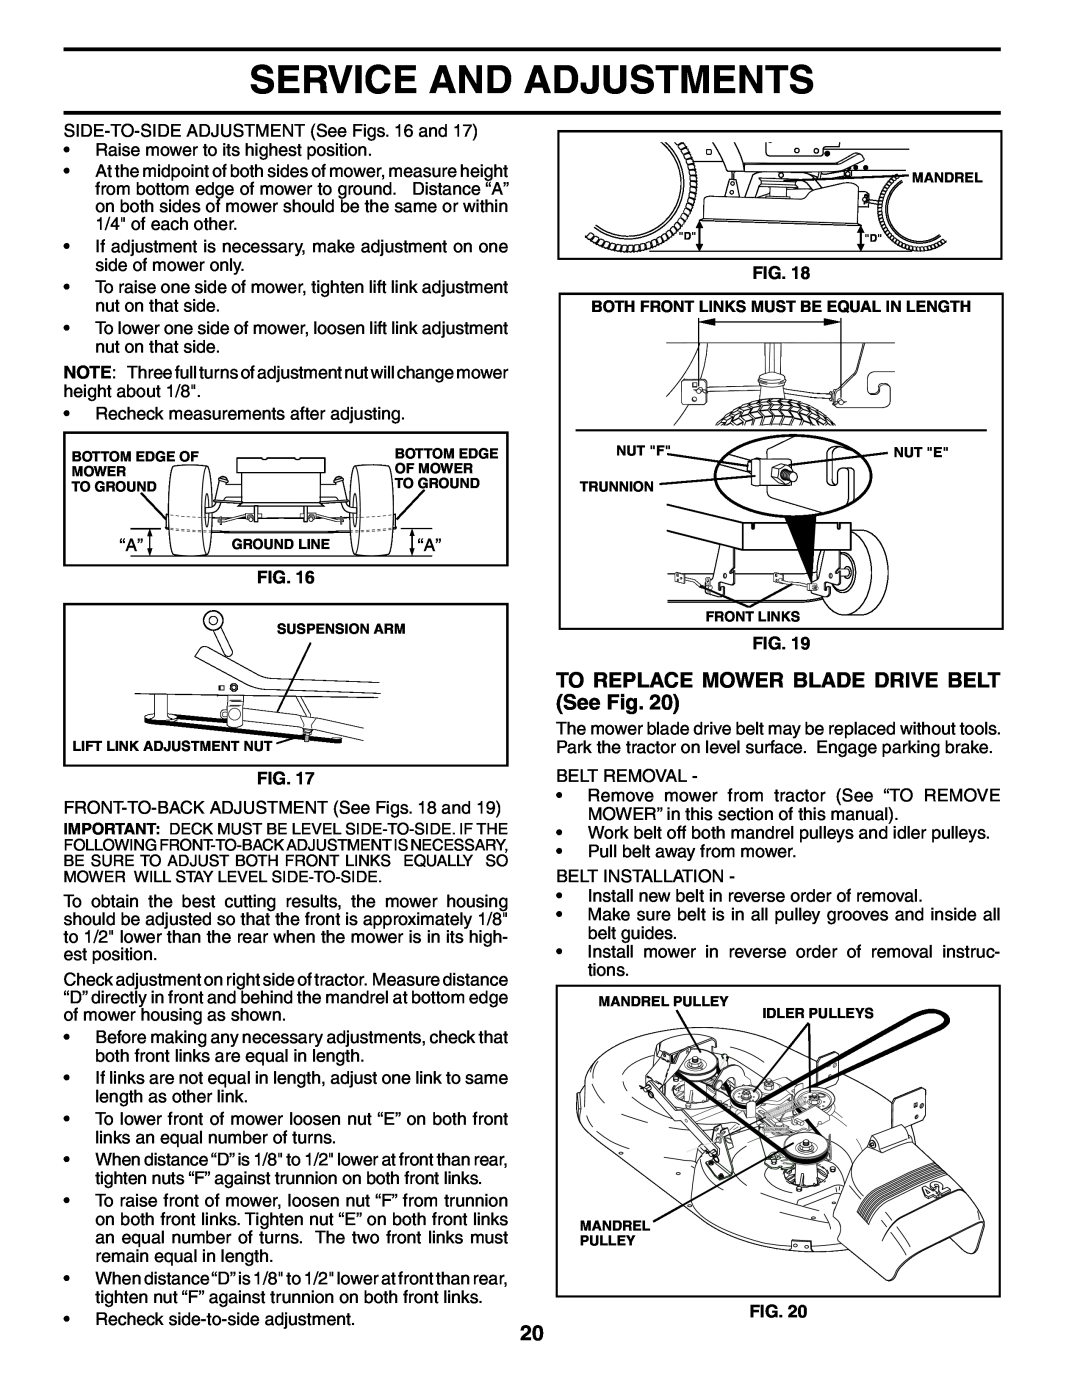 Poulan BB185H42YT manual TO REPLACE MOWER BLADE DRIVE BELT See Fig, Service And Adjustments 